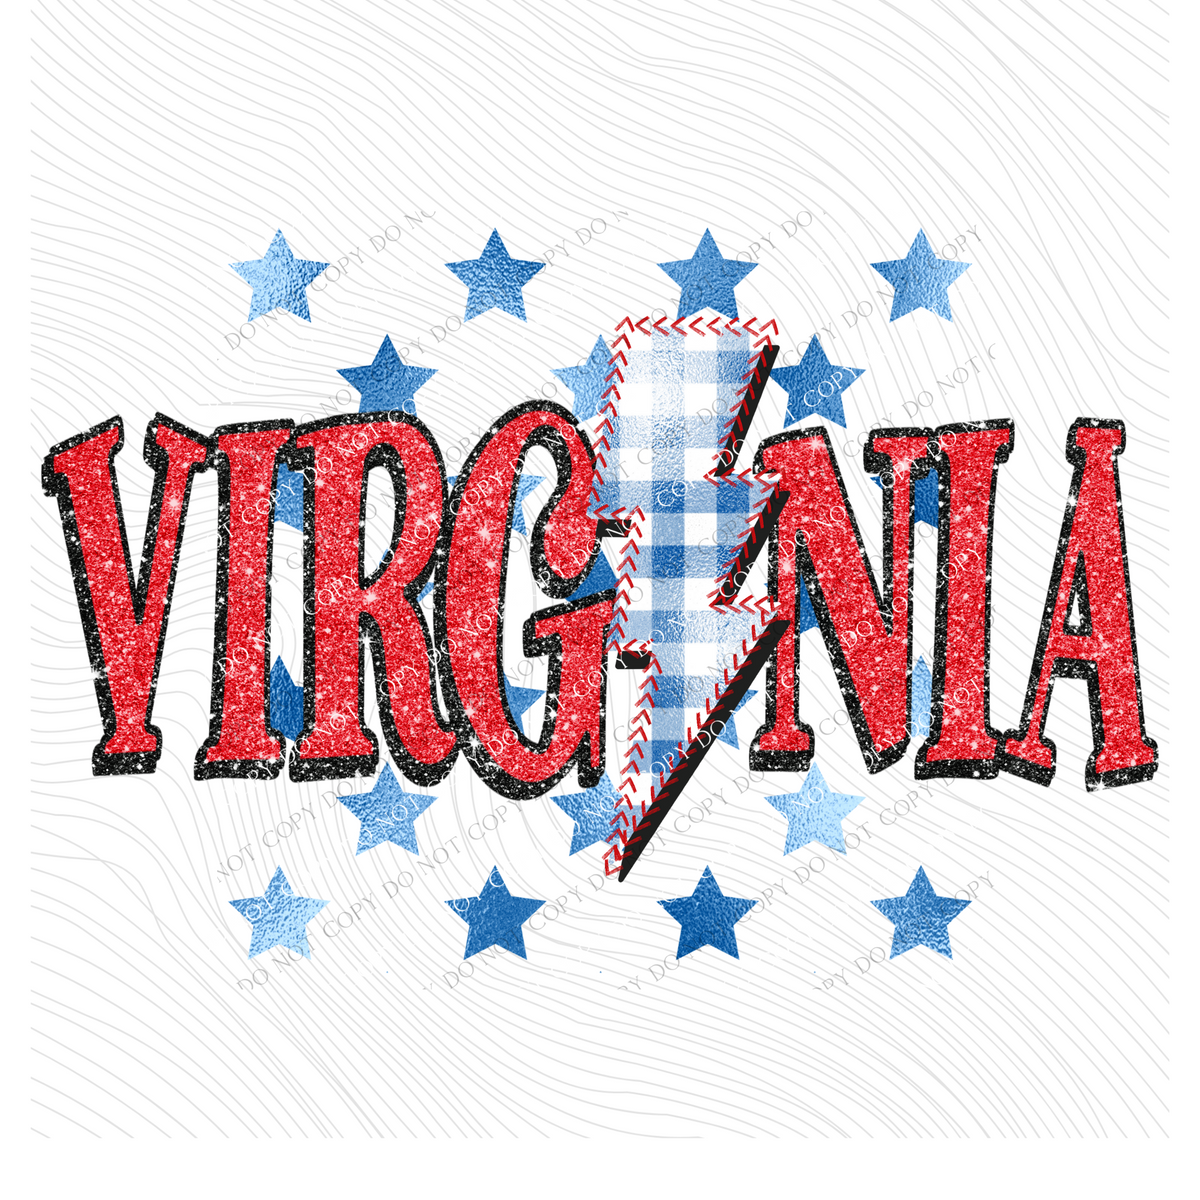 Virginia Glitter with Foil Stars & Gingham Stitched Bolt in Red, White & Blue Patriotic Digital Design, PNG